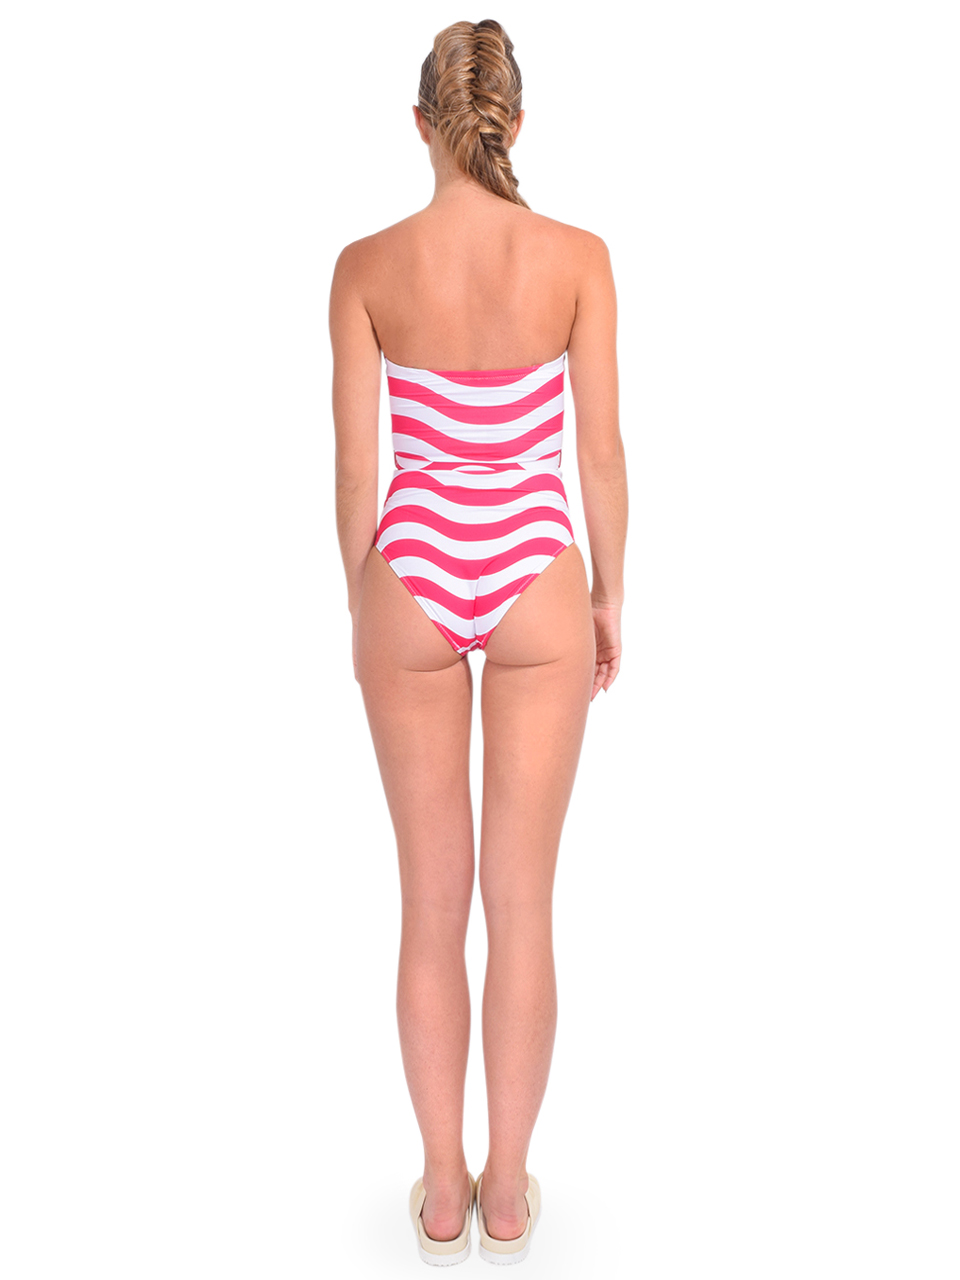 SOLID & STRIPED Madeline Belted One Piece in Wavy Lollipop Stripe No Straps Back View 